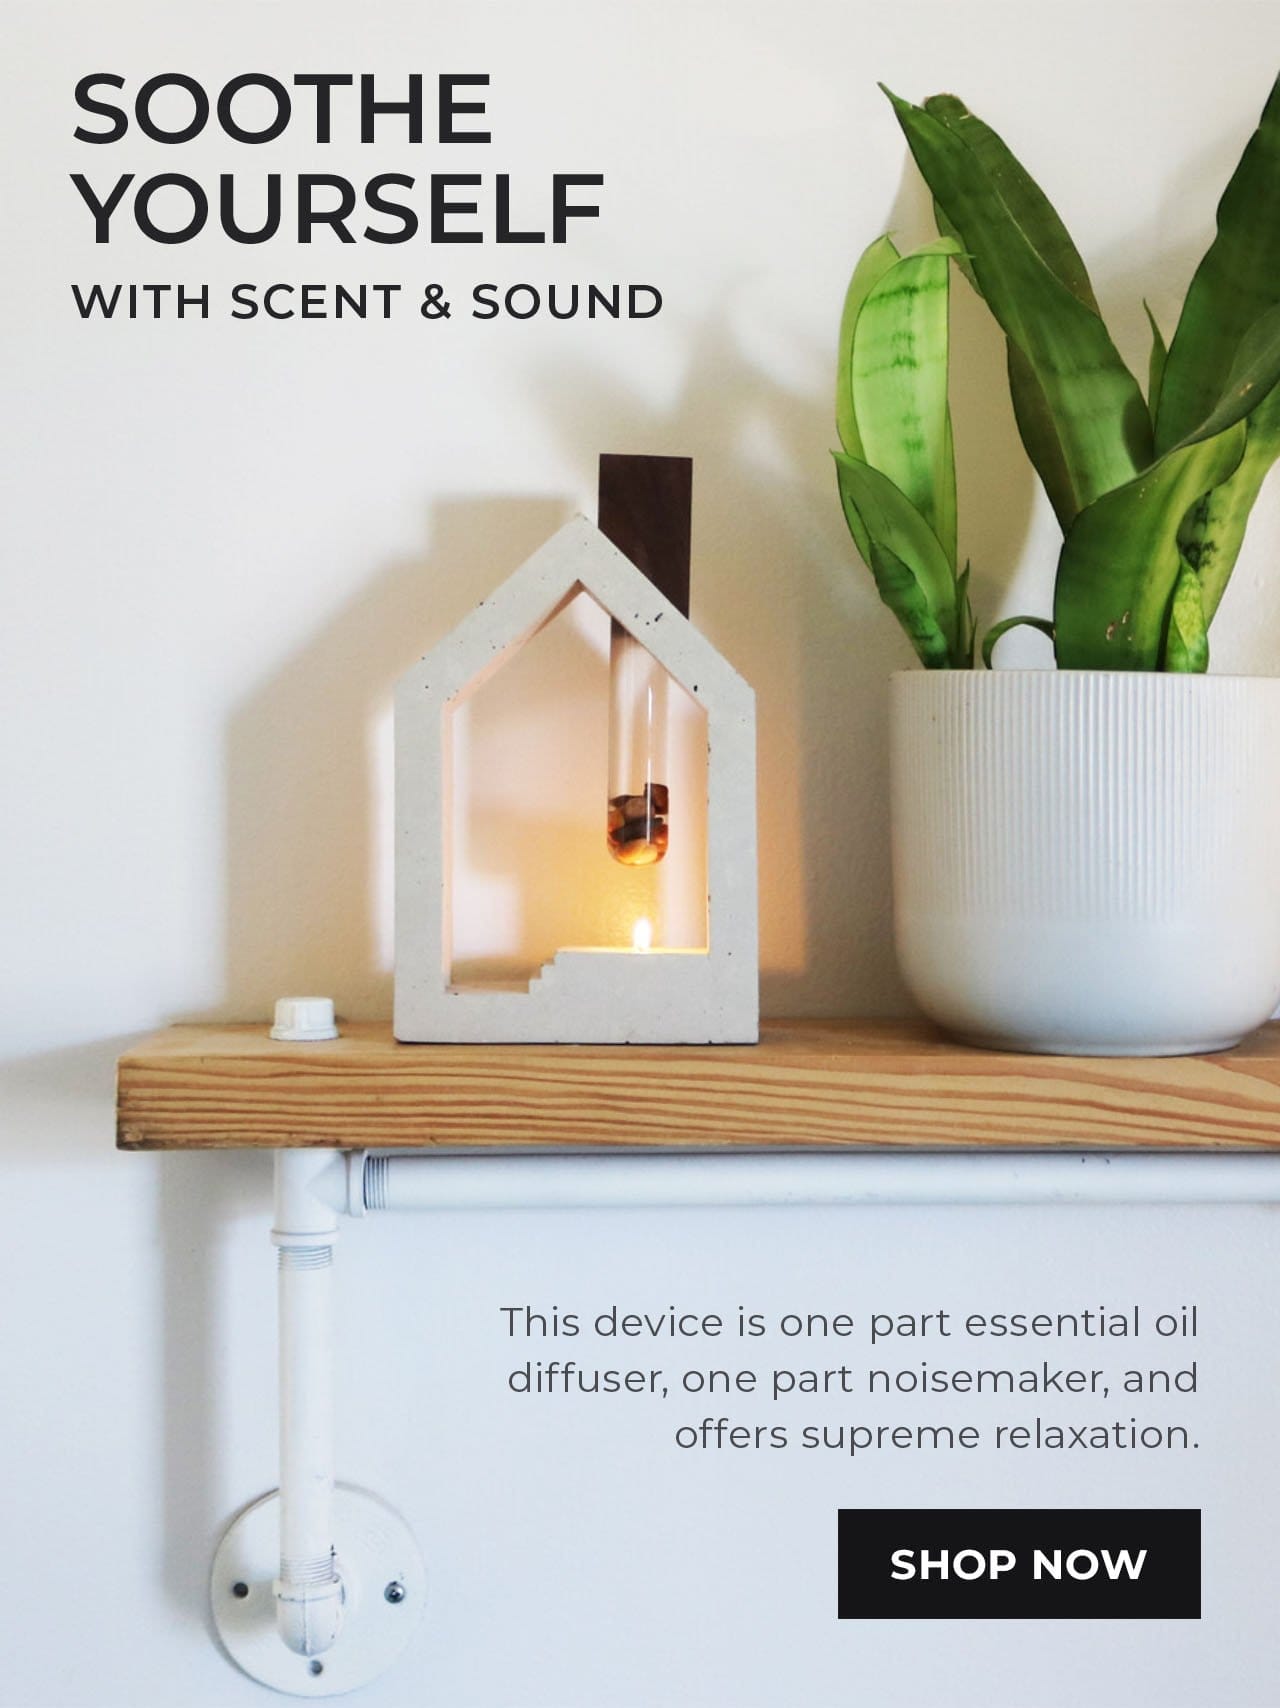 Soothe Yourself with Scent & Sound | SHOP NOW